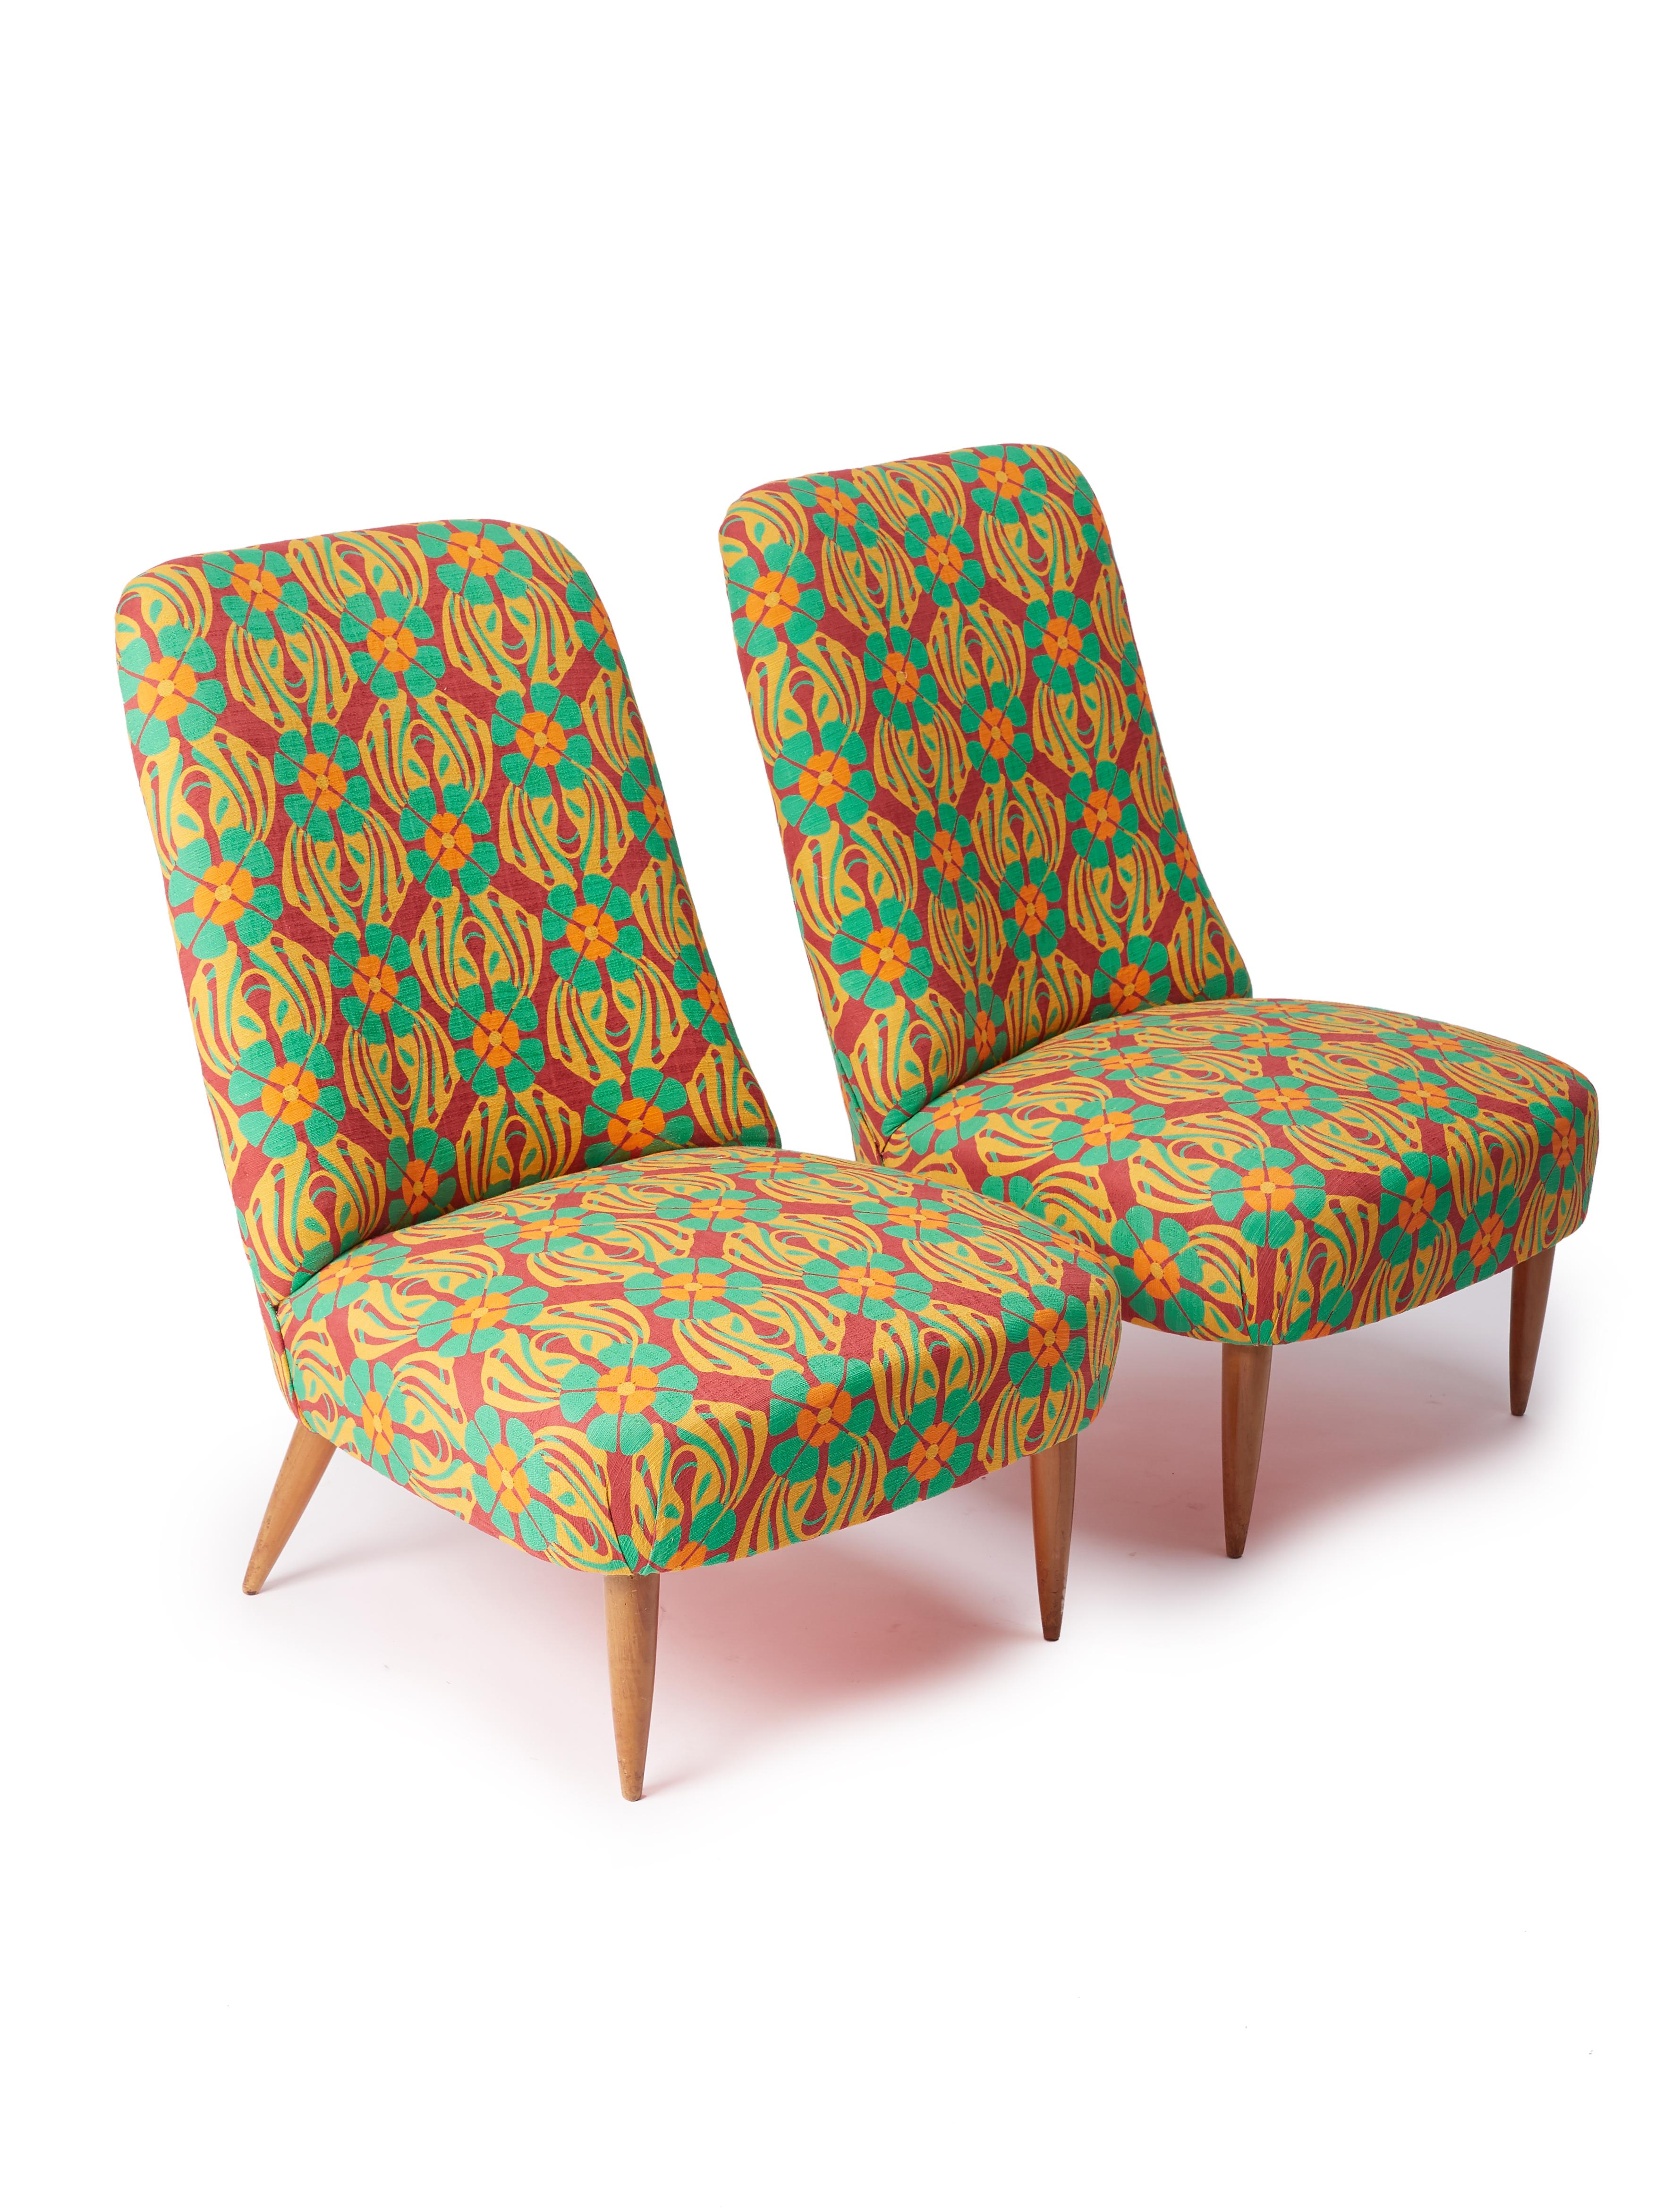 Settle into some la dolce vita history with this set of two vintage chairs originally made in Italy in the 1950s - part of our happy-making homeware collaboration with the antique marketplace maestros, 1stDibs. High-backed and crafted from